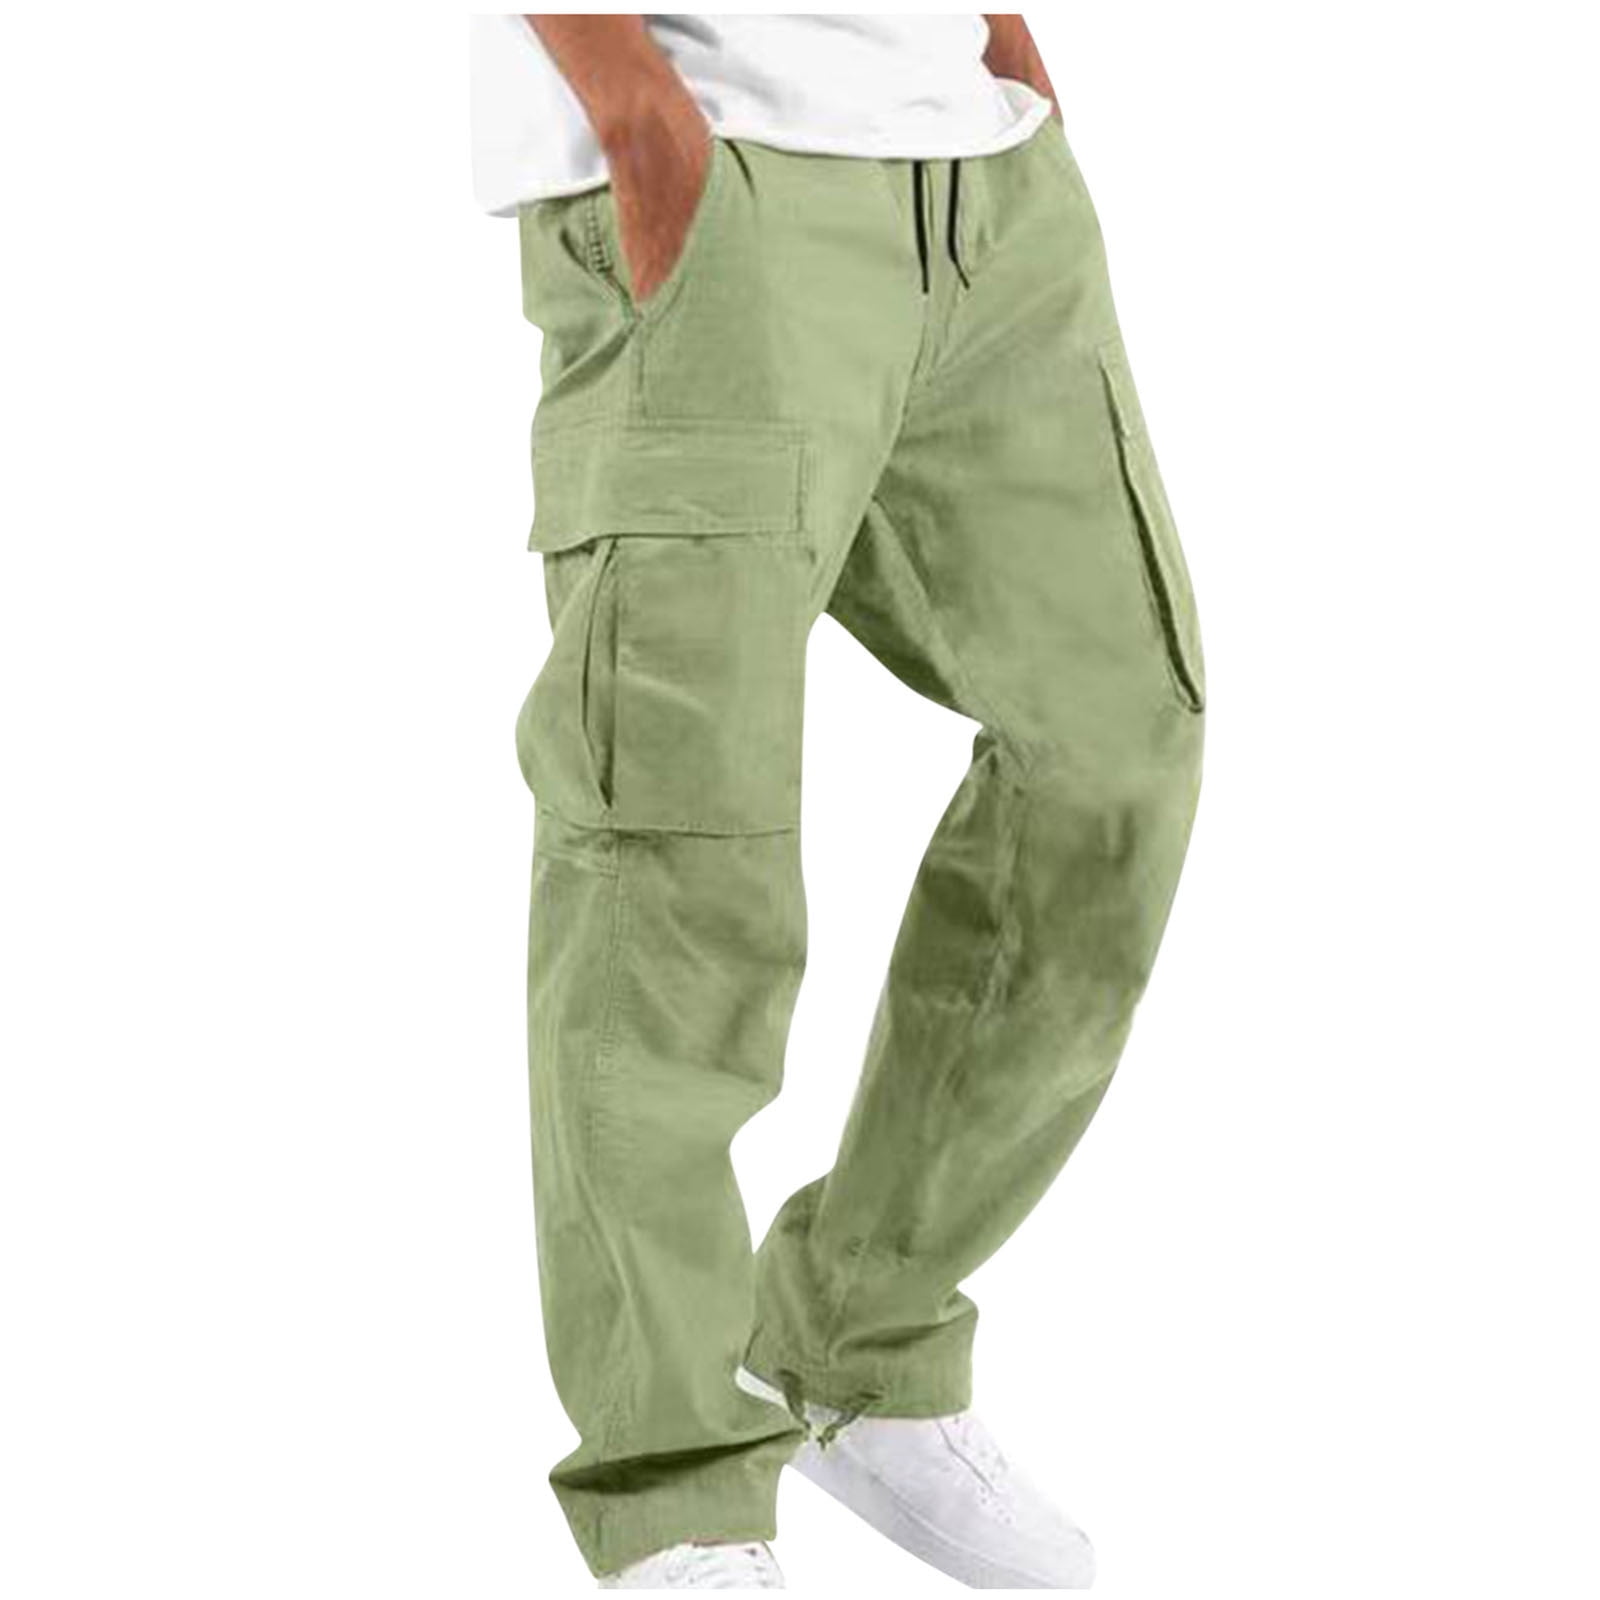 Mens Baggy Cargo Pants Casual Lightweight Hiking Fishing Trousers  Drawstring Outdoor Relaxed Fit Slacks Cargo Pants 